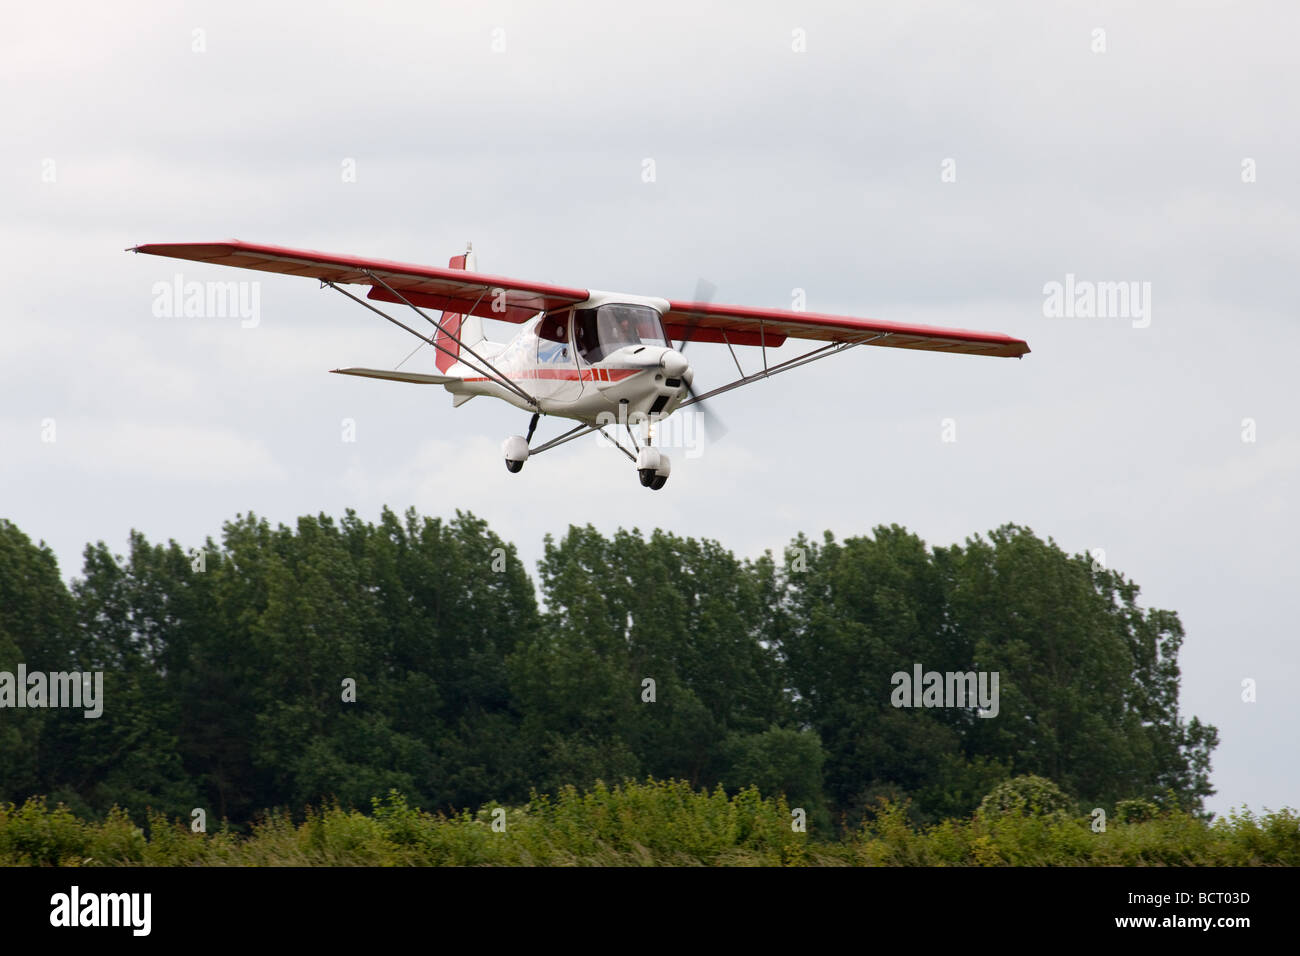 Ikarus C42 FB UK G-IKUS on final approach to land at Wickenby Airfield Stock Photo